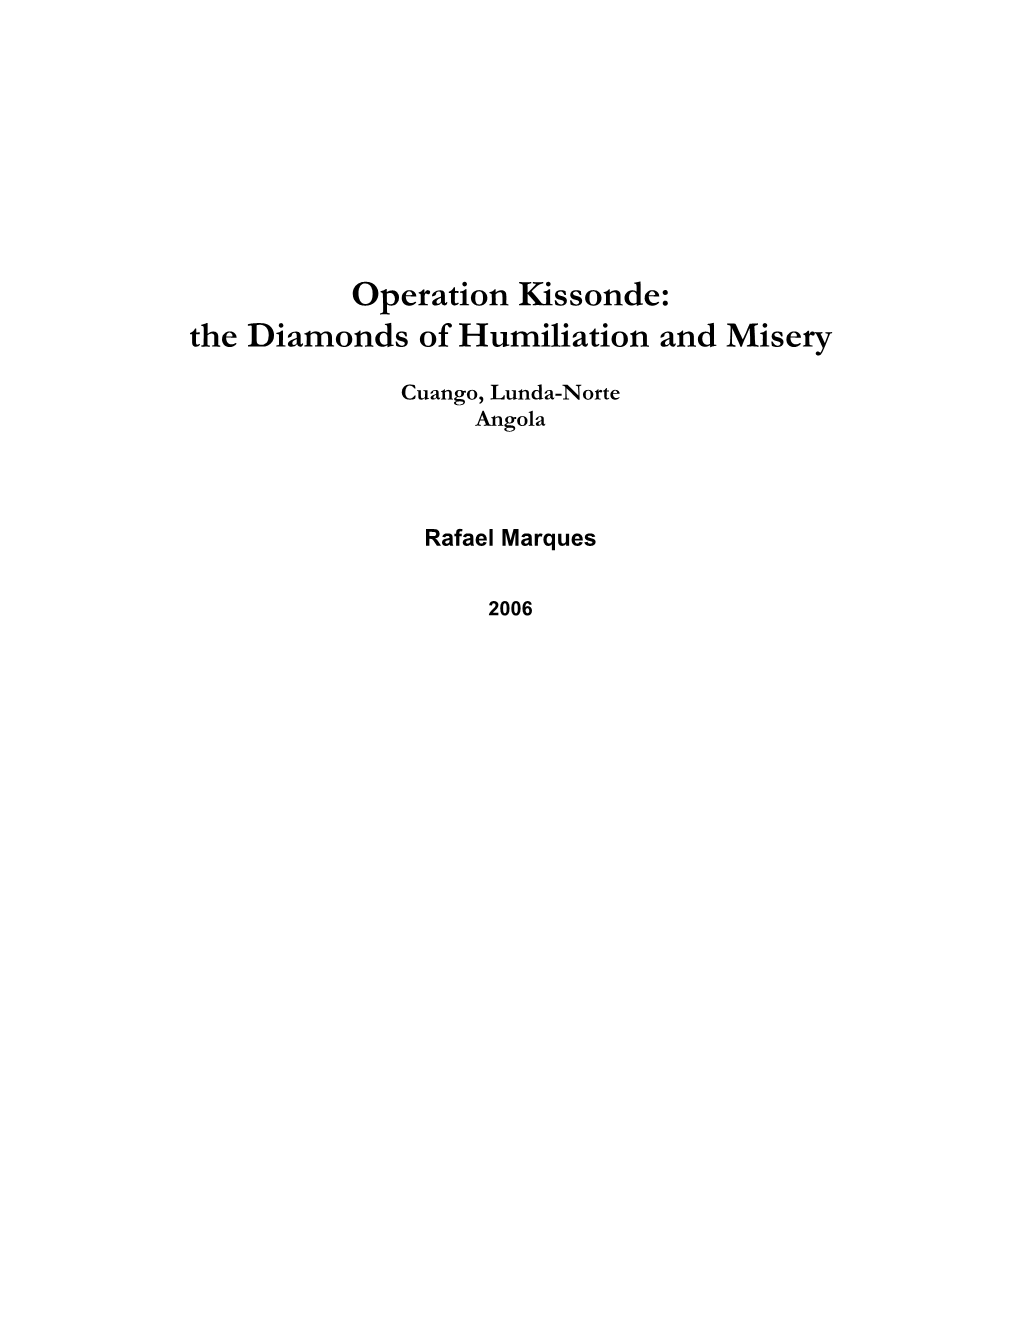 Operation Kissonde: the Diamonds of Humiliation and Misery